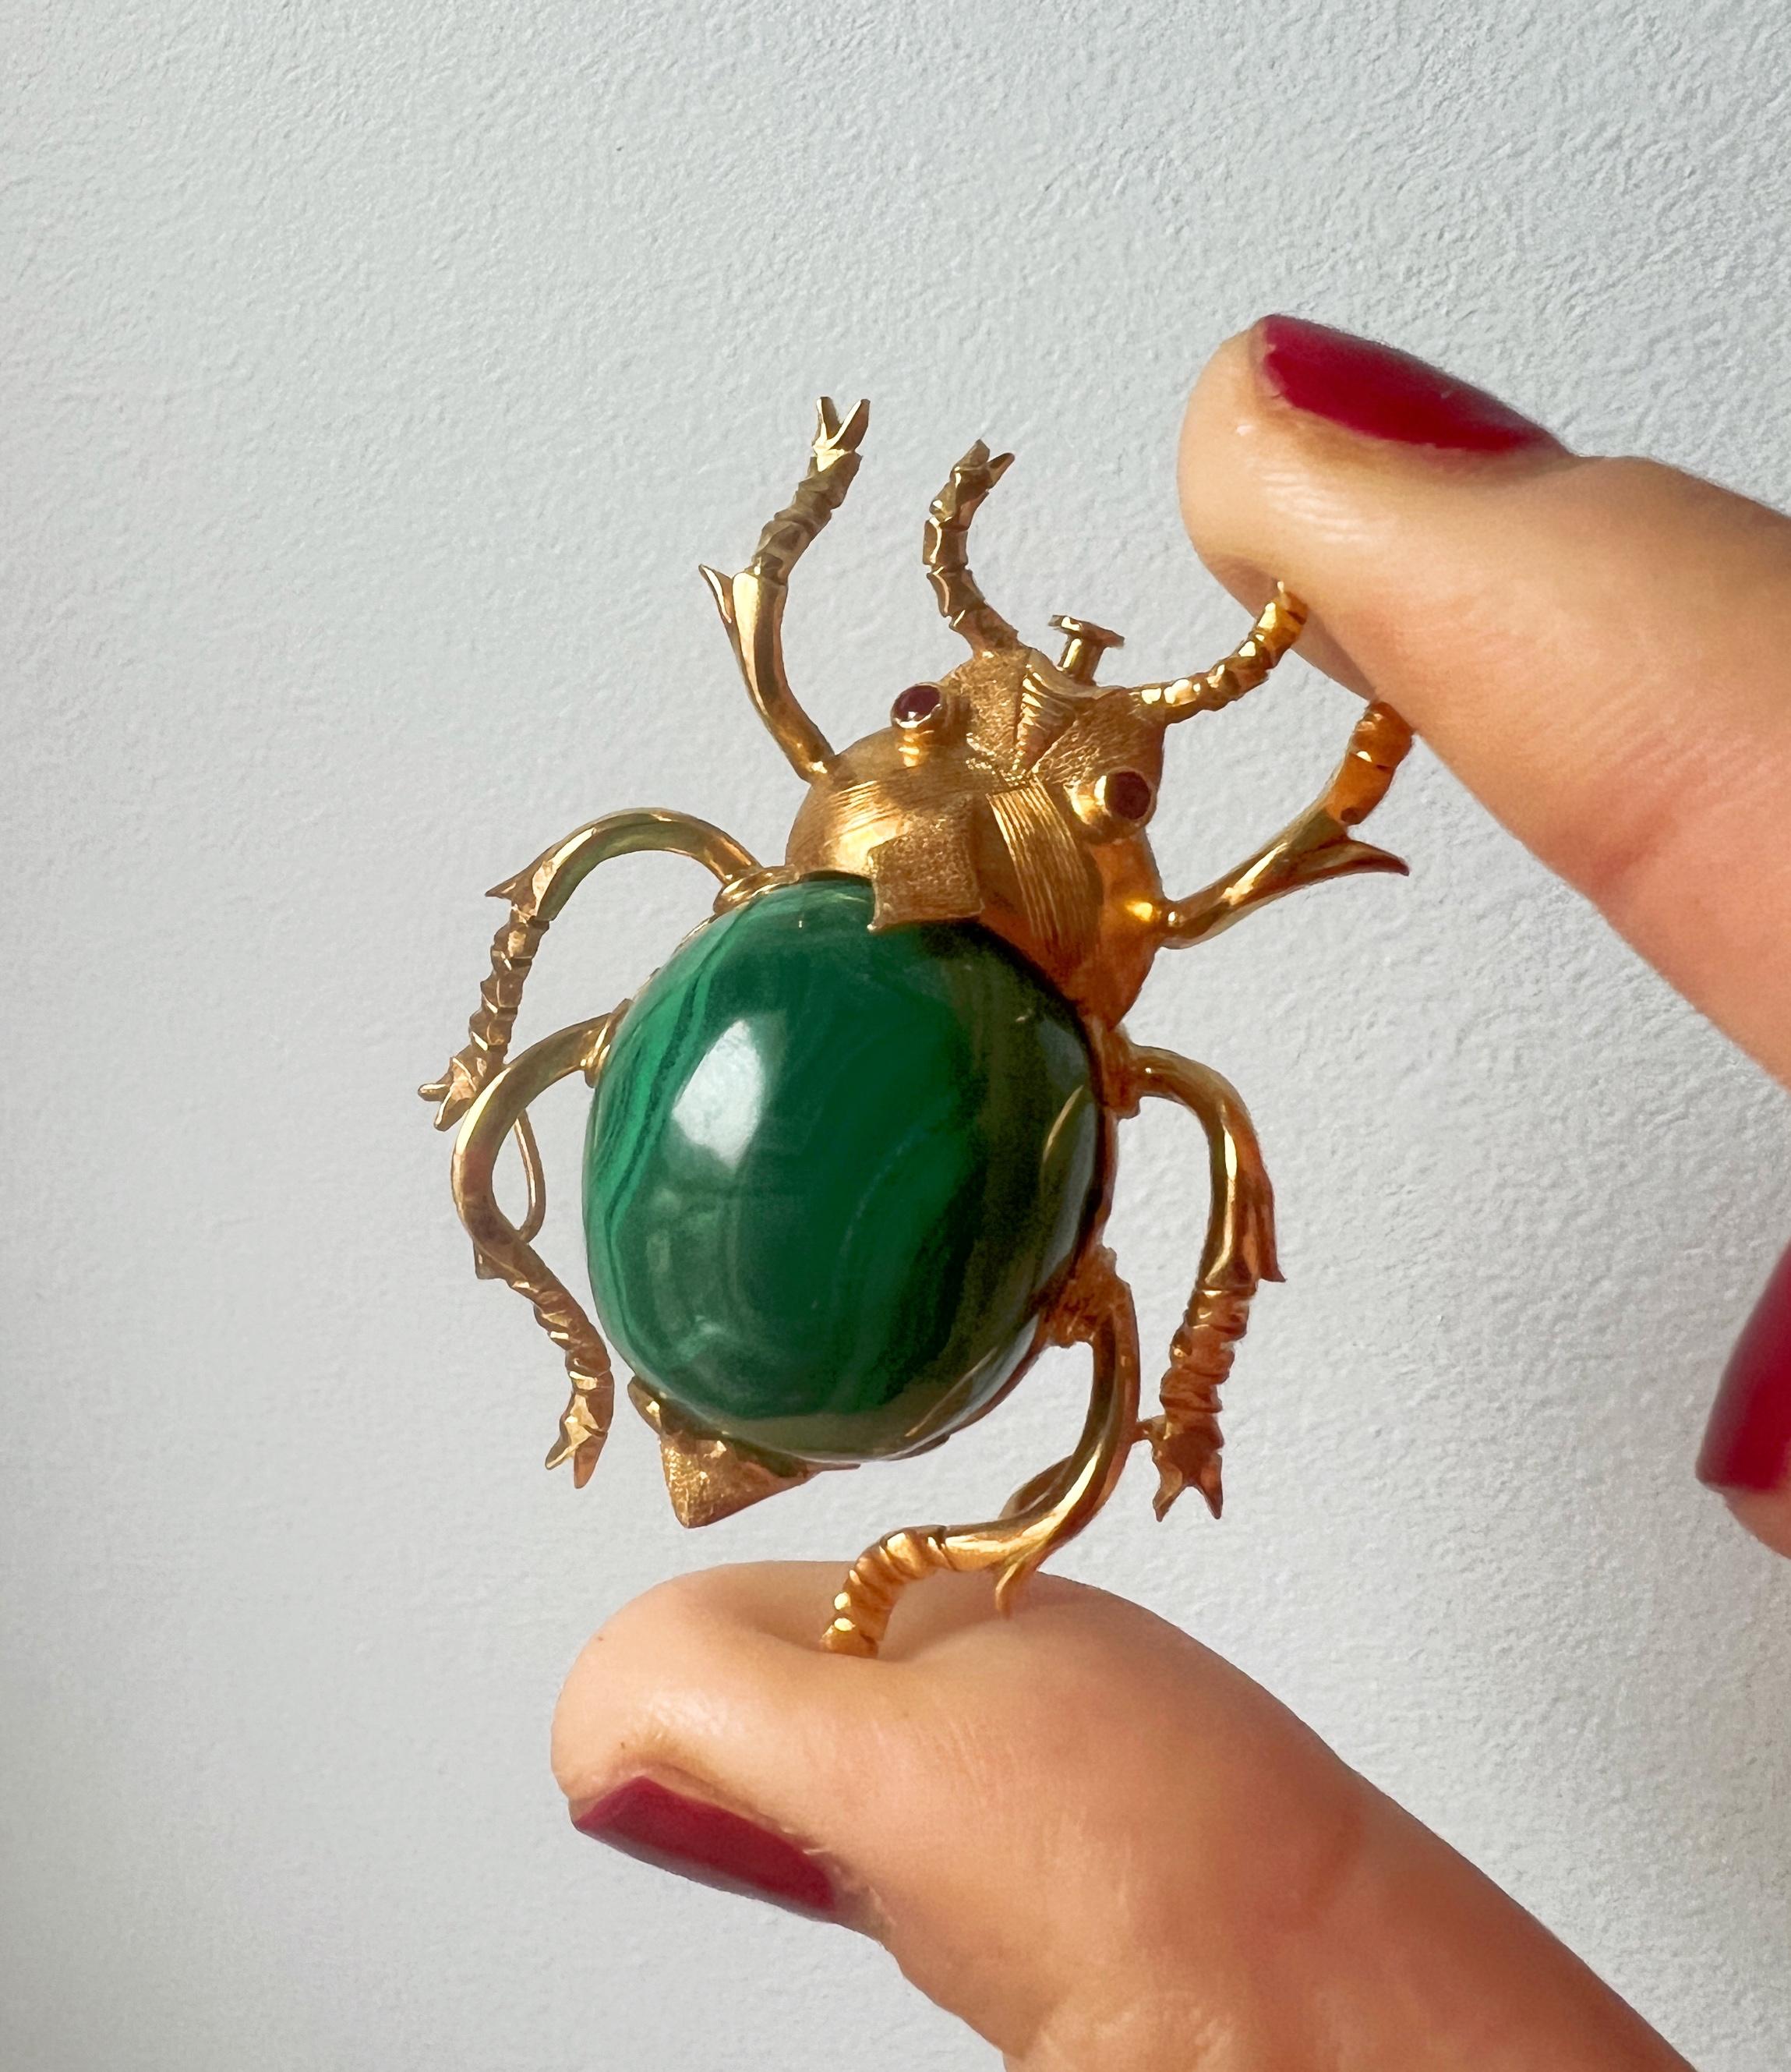 Over the history and in ancient Egyptian religion the scarab was the symbol of immortality, resurrection, transformation and protection. It was one of the most important religious Egyptian Symbols in the mythology. The Scarab beetle symbolized the